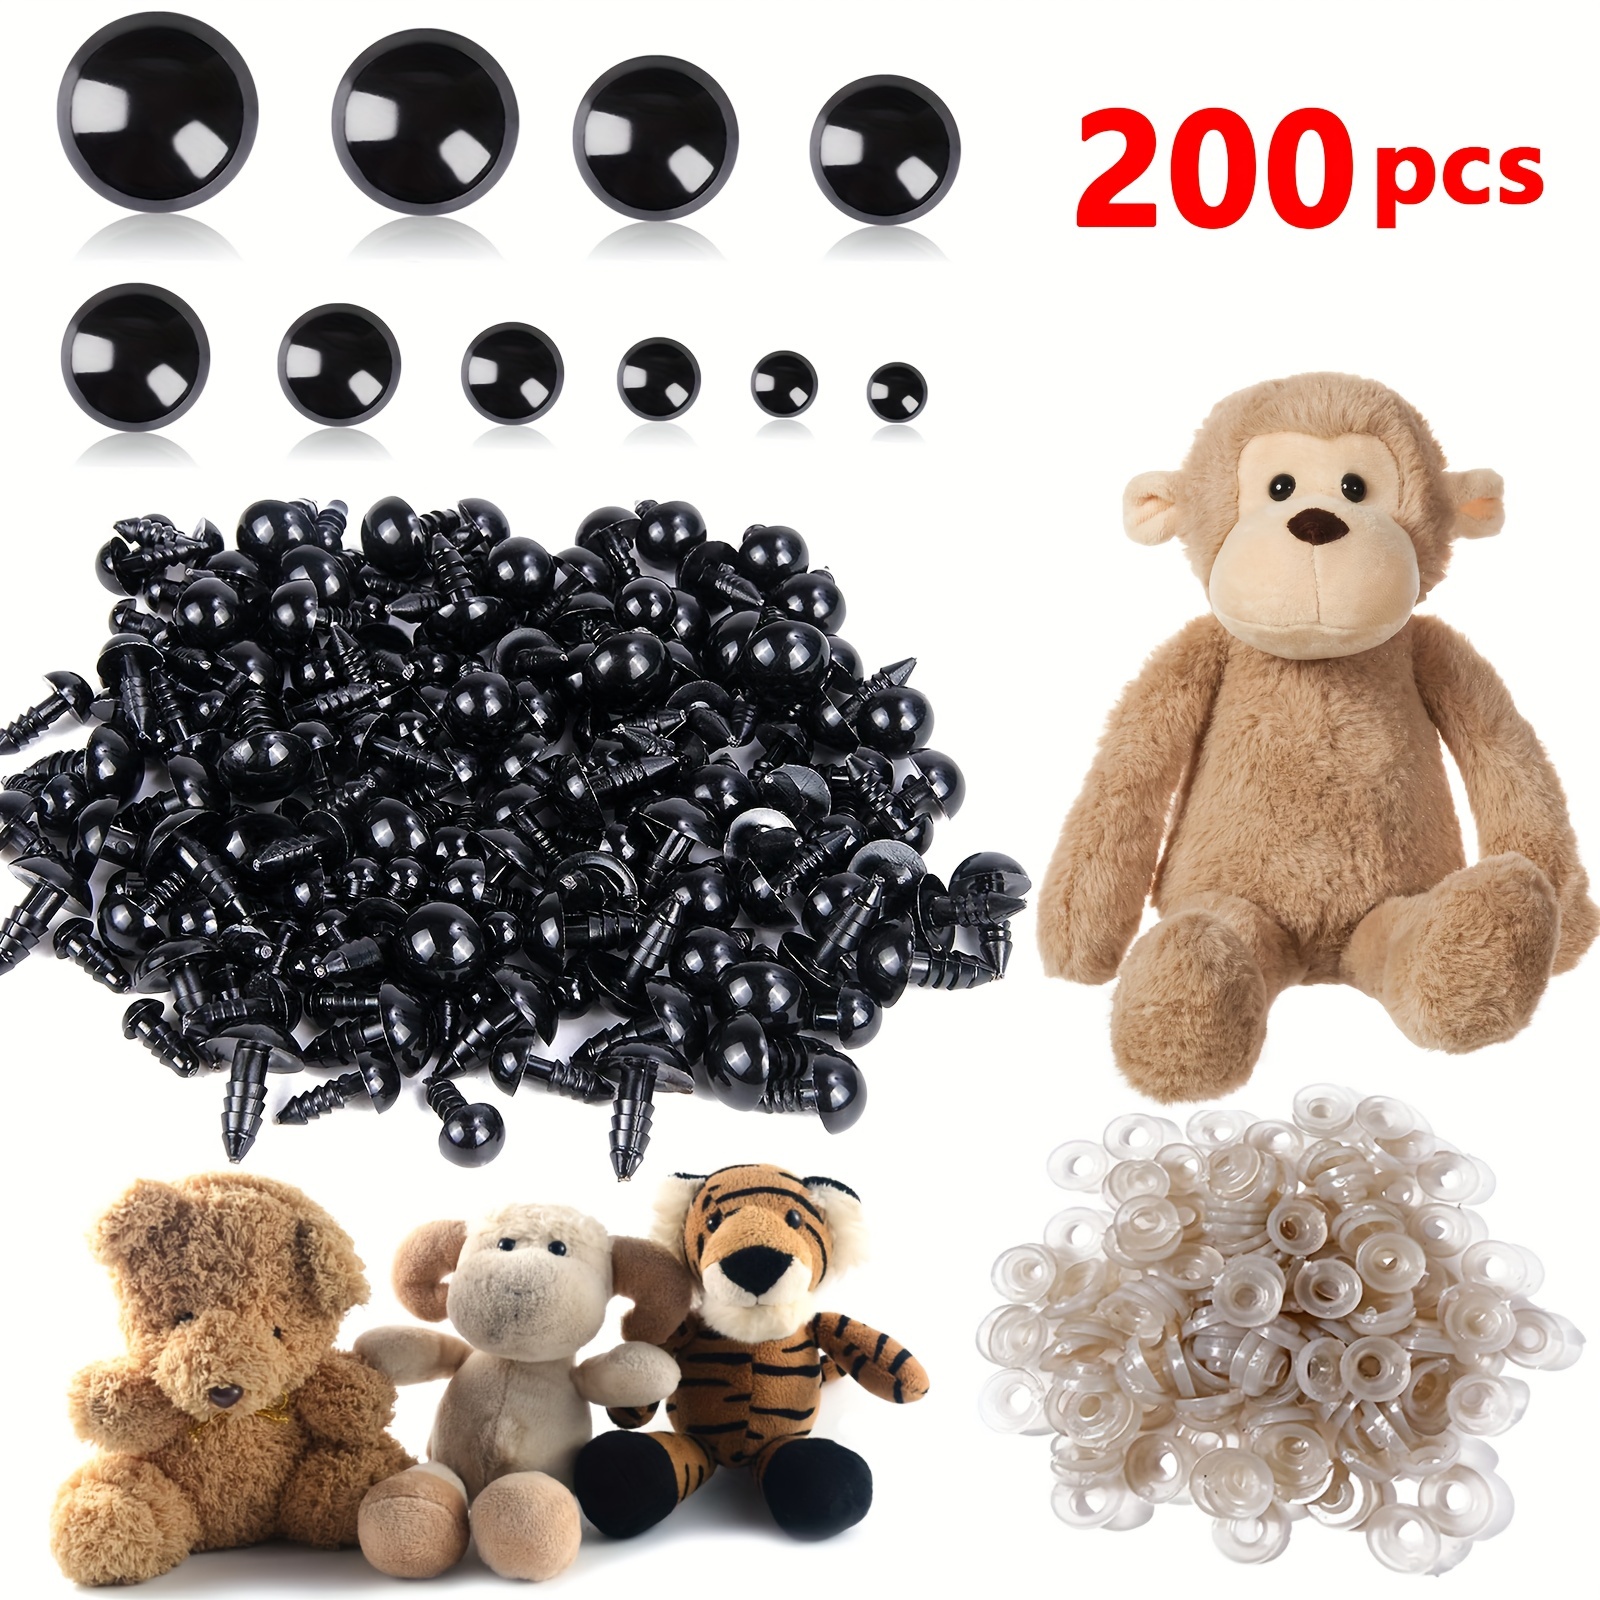 

200pcs Safety Eyes For Amigurumi, Stuffed Crochet Eyes With Washers, Craft Doll Eyes And Nose For Teddy Bear, Crochet Toy, Stuffed Doll And Plush Animal (various Sizes)